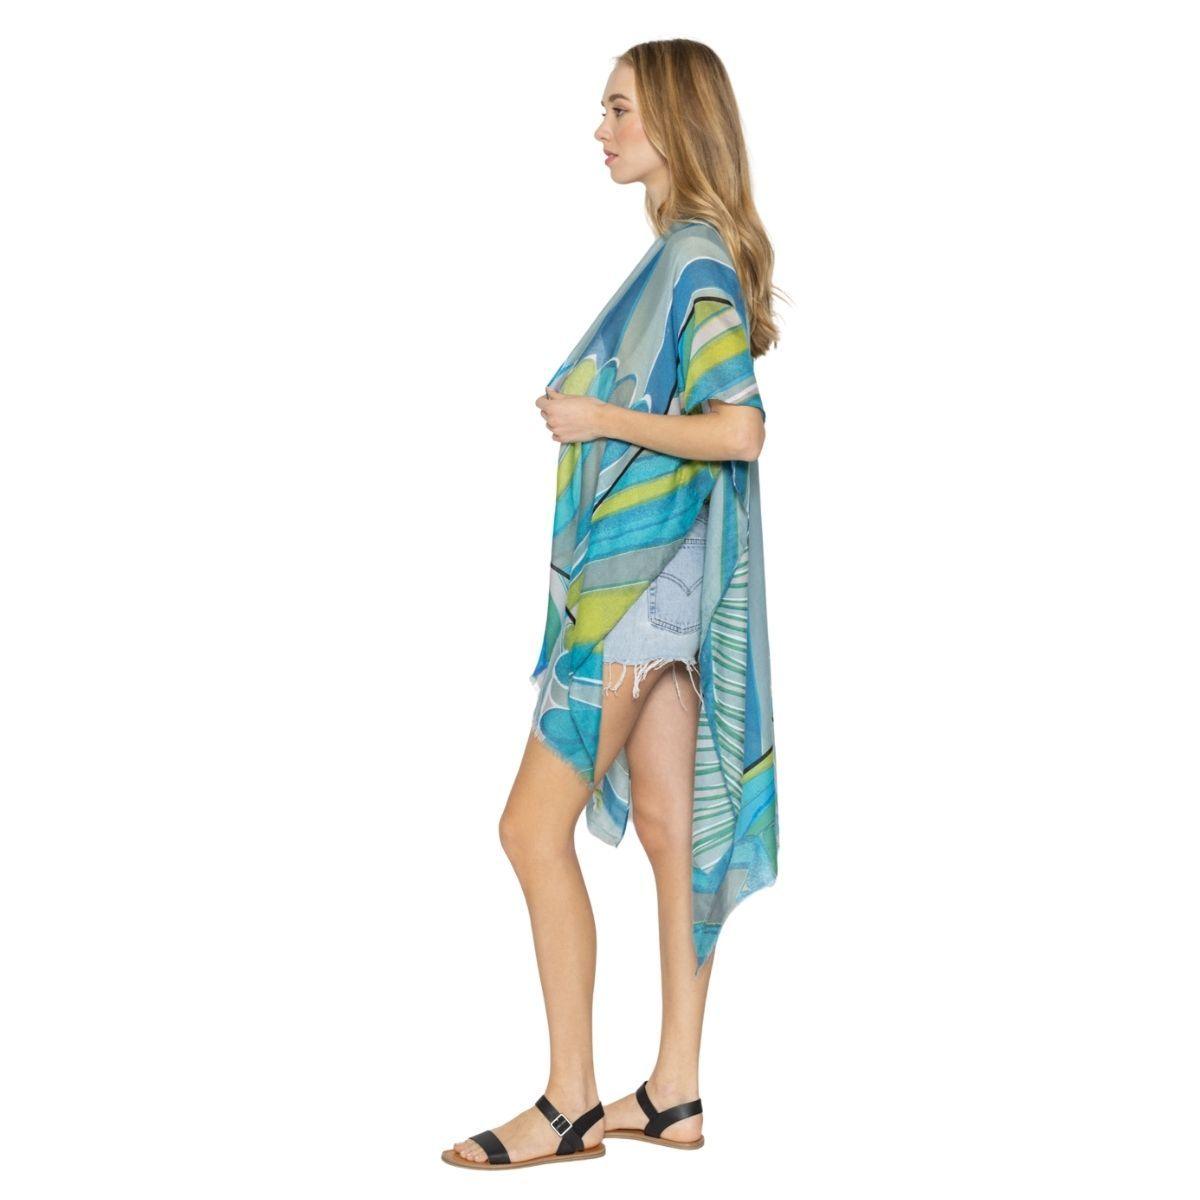 Discover the Perfect Kimono Top for Your Wardrobe - Green Abstract Print!